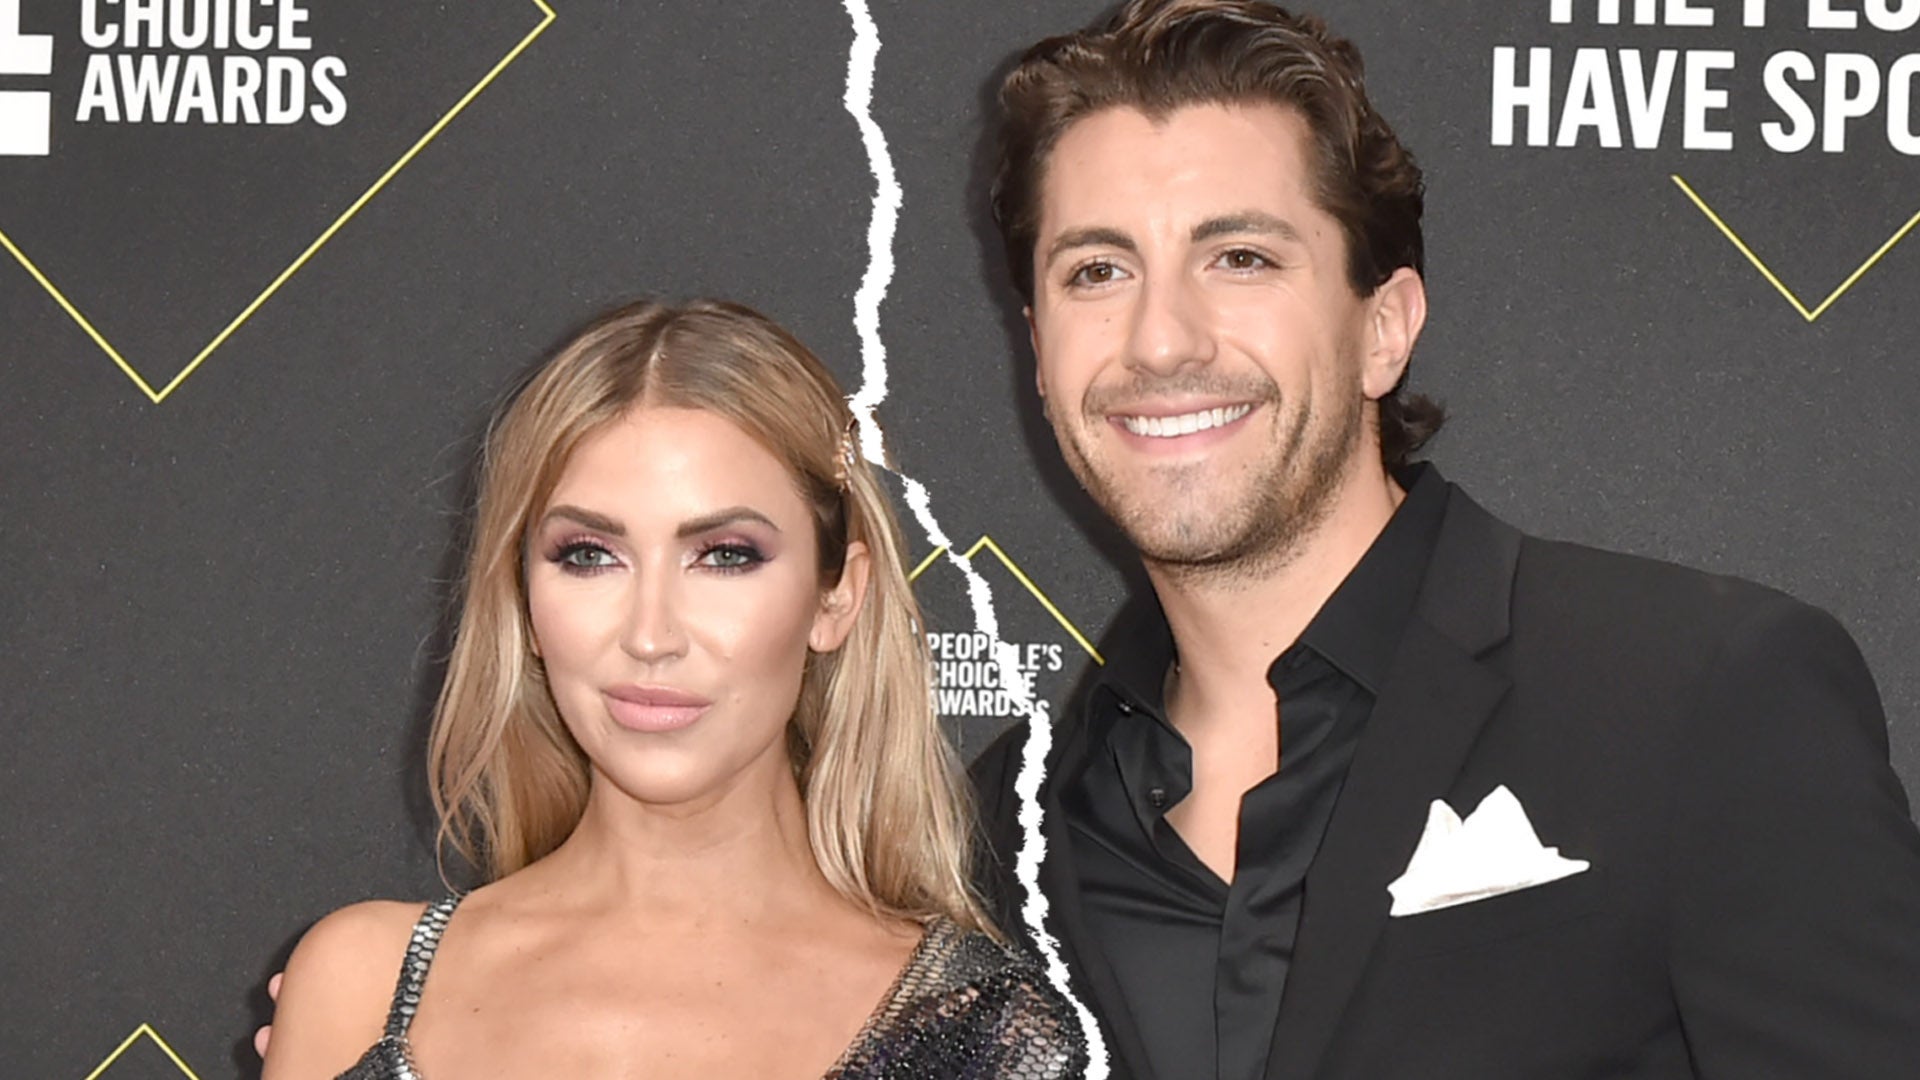 'The Bachelorette's Kaitlyn Bristowe & Jason Tartick Call It Quits After More Than 4 Years Together